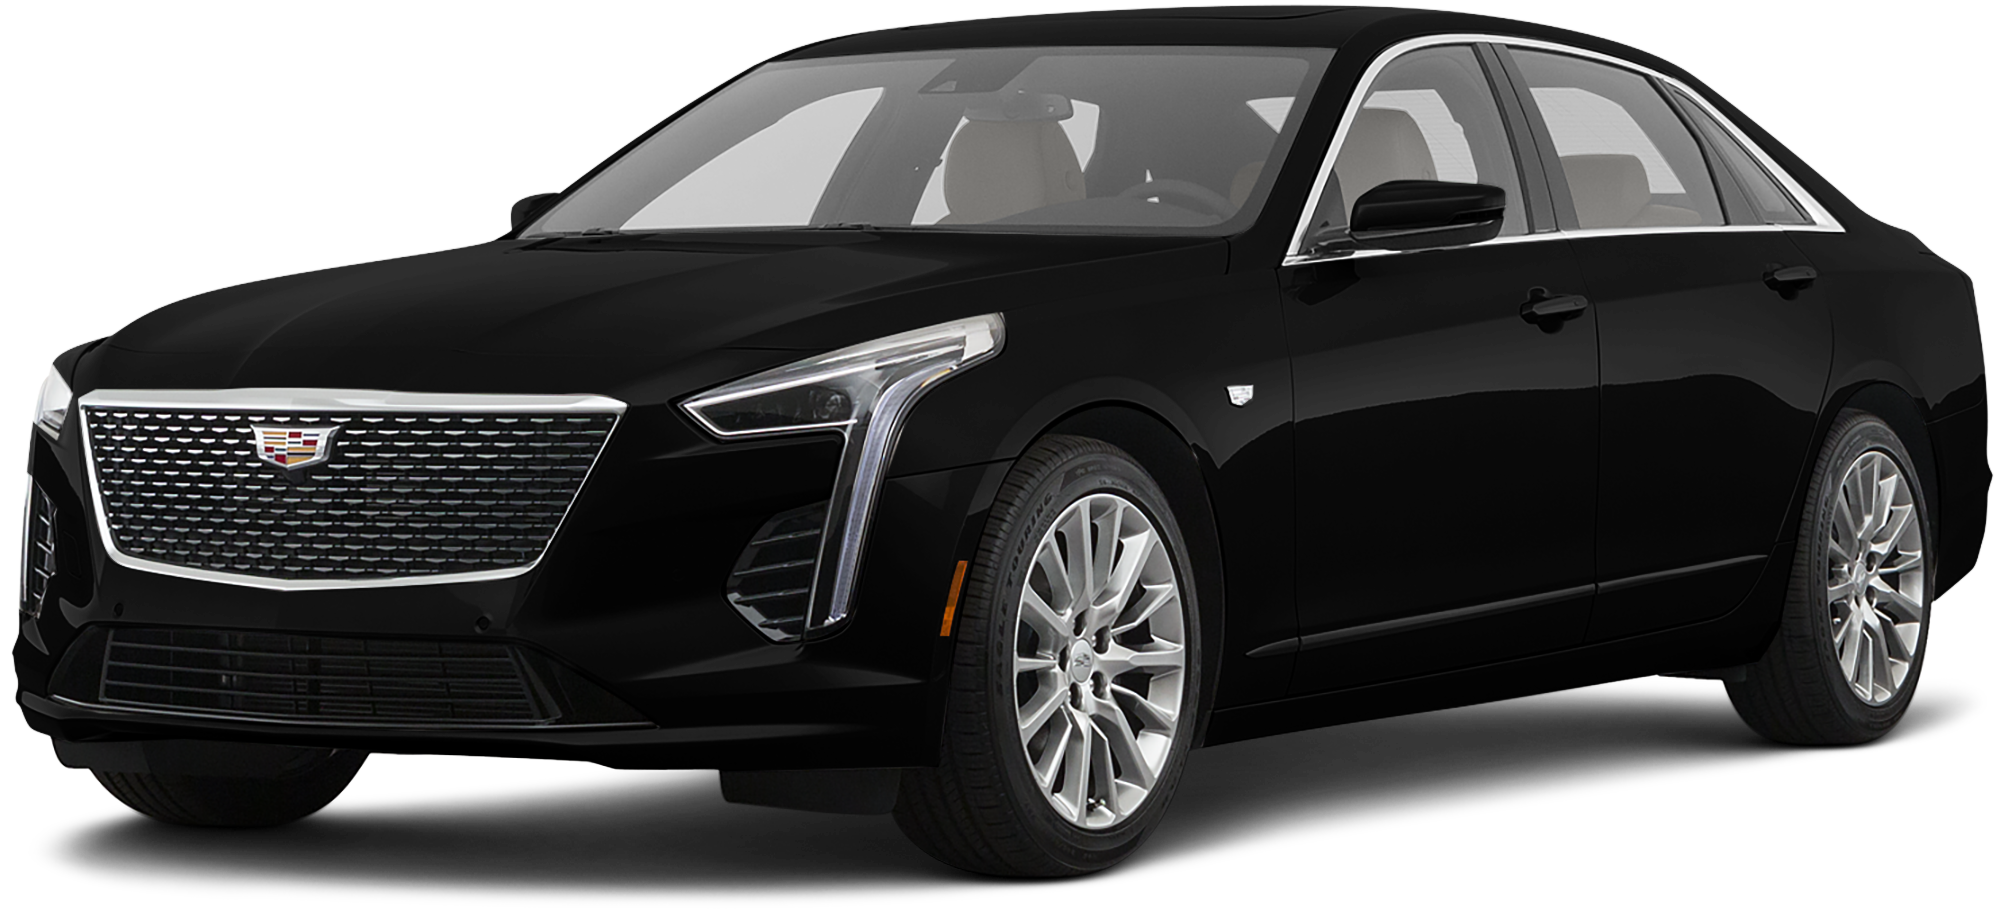 2020 CADILLAC CT6-V Incentives, Specials & Offers in Carlsbad CA